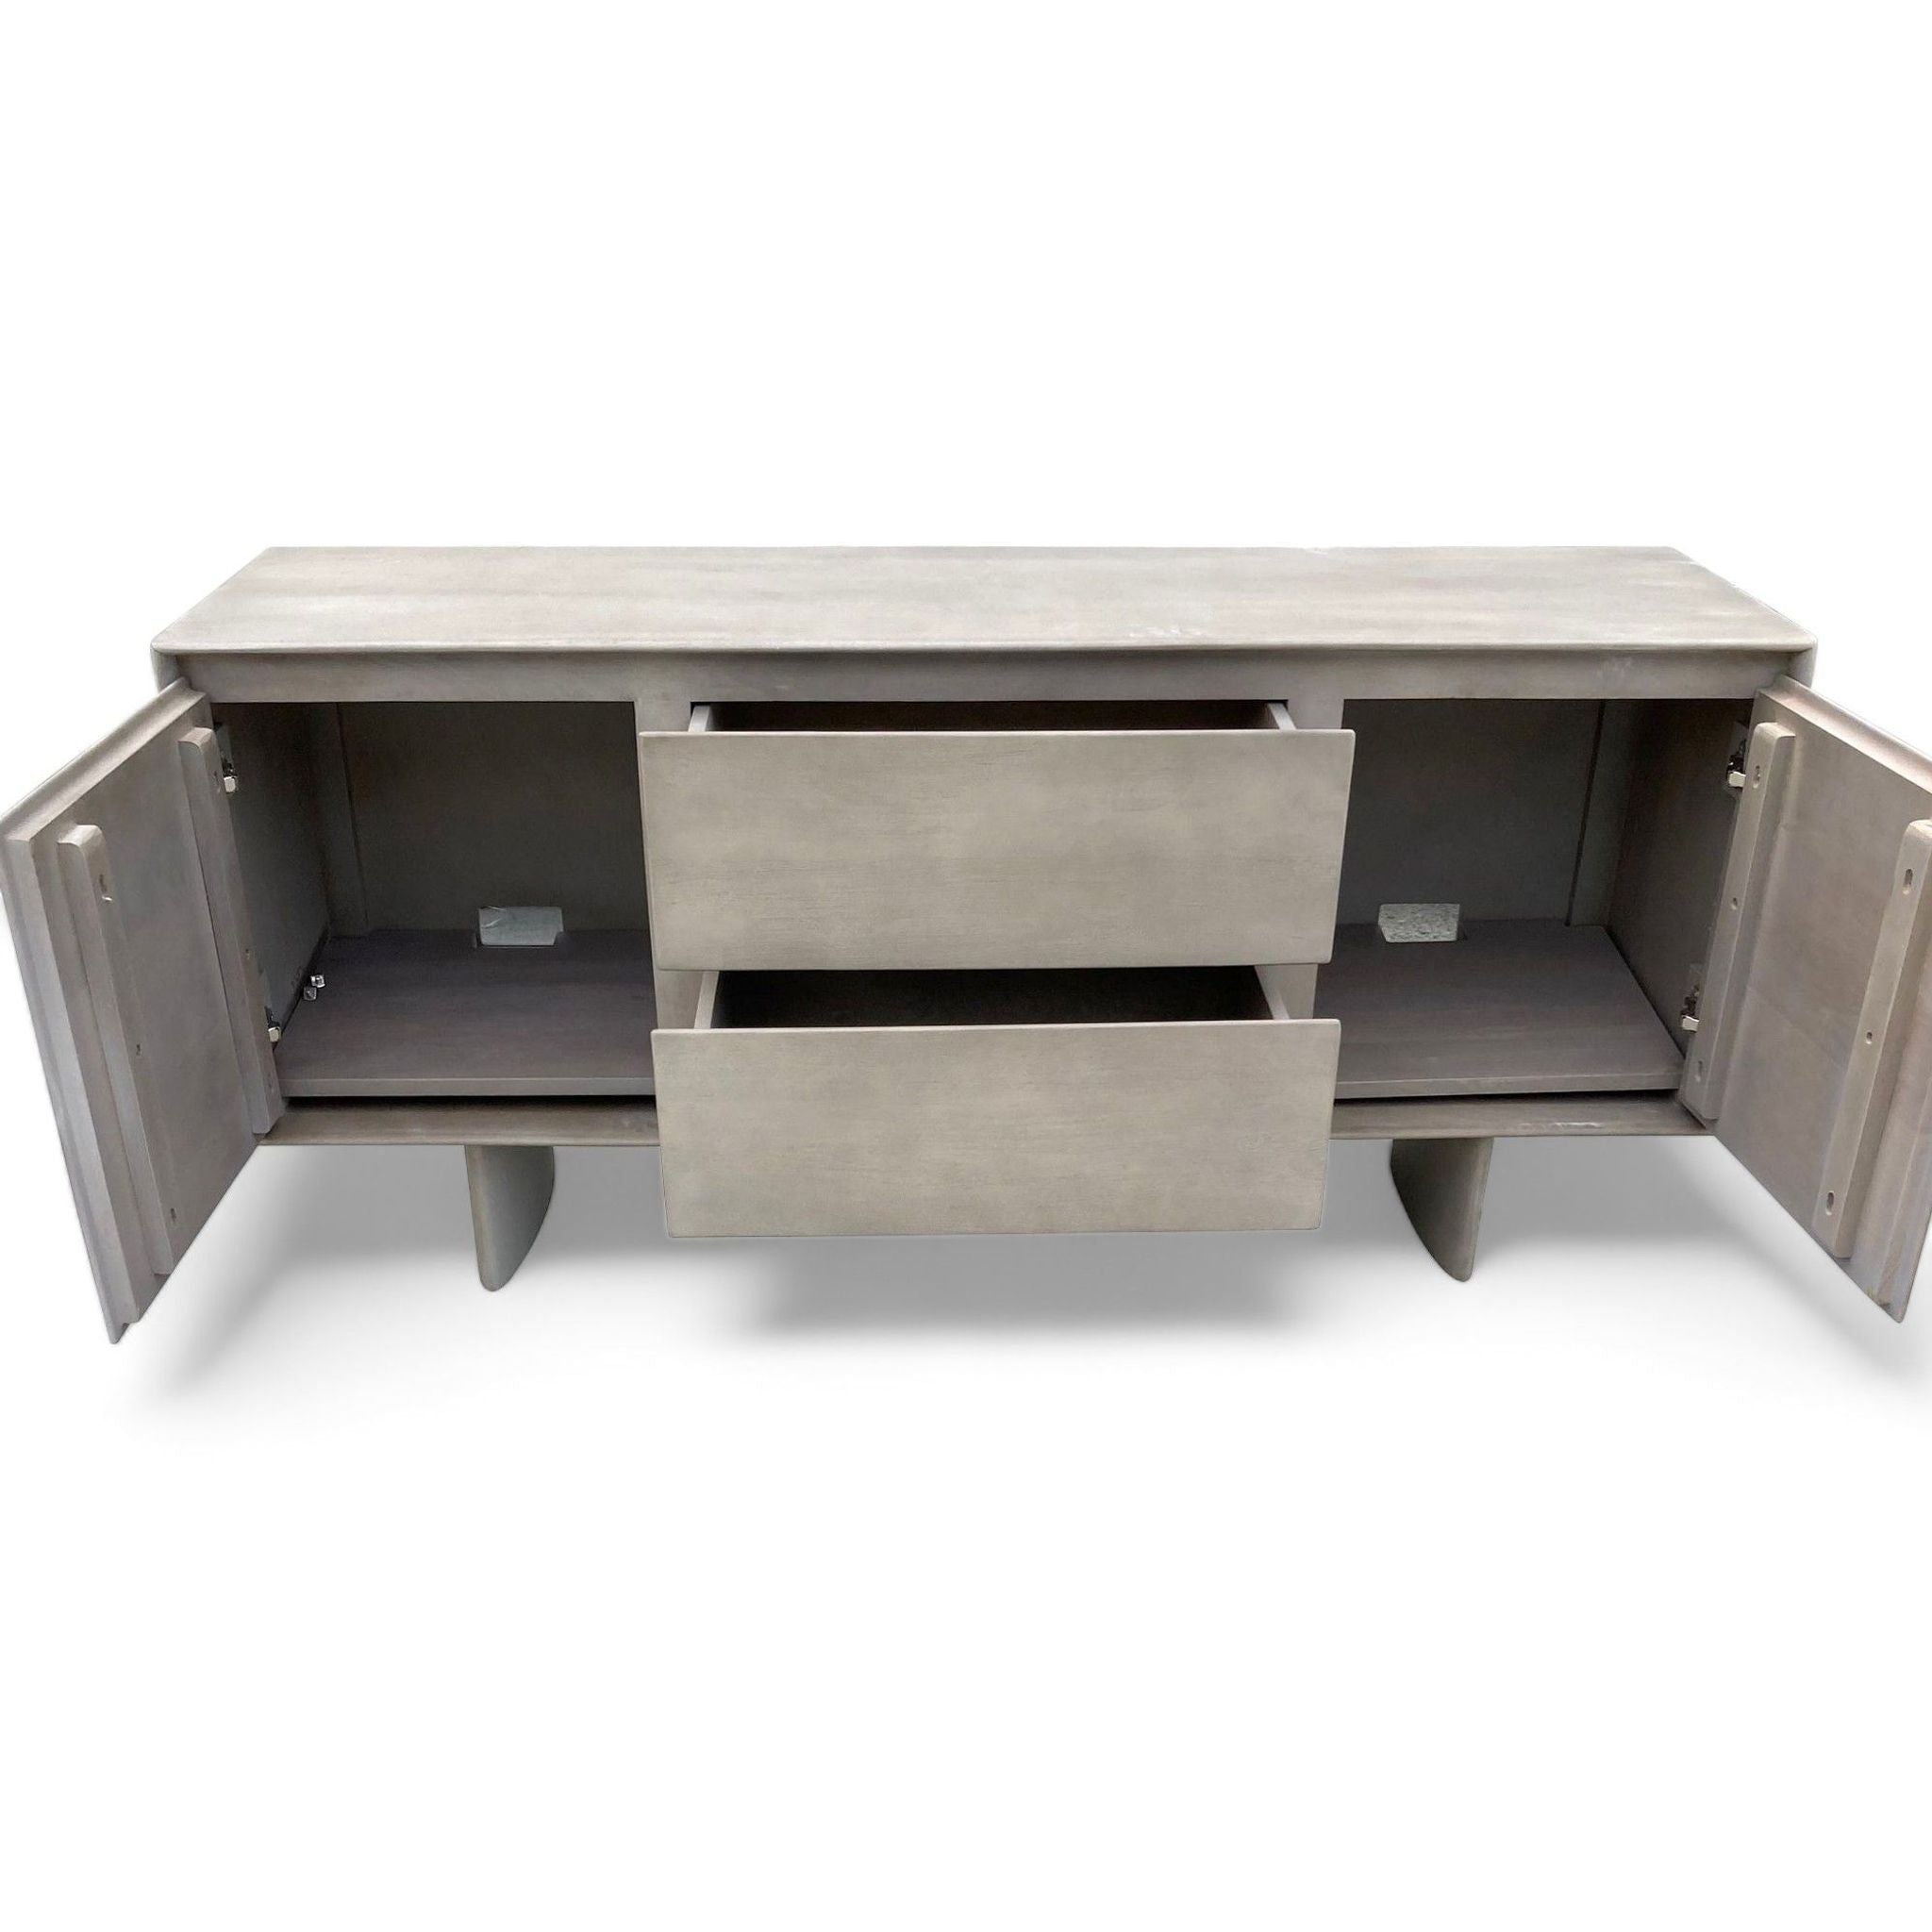 Alt text 2: Open mango wood buffet displaying its interior with shelves in the cabinets and two pull-out drawers, highlighting ample storage space, by Williams Sonoma.